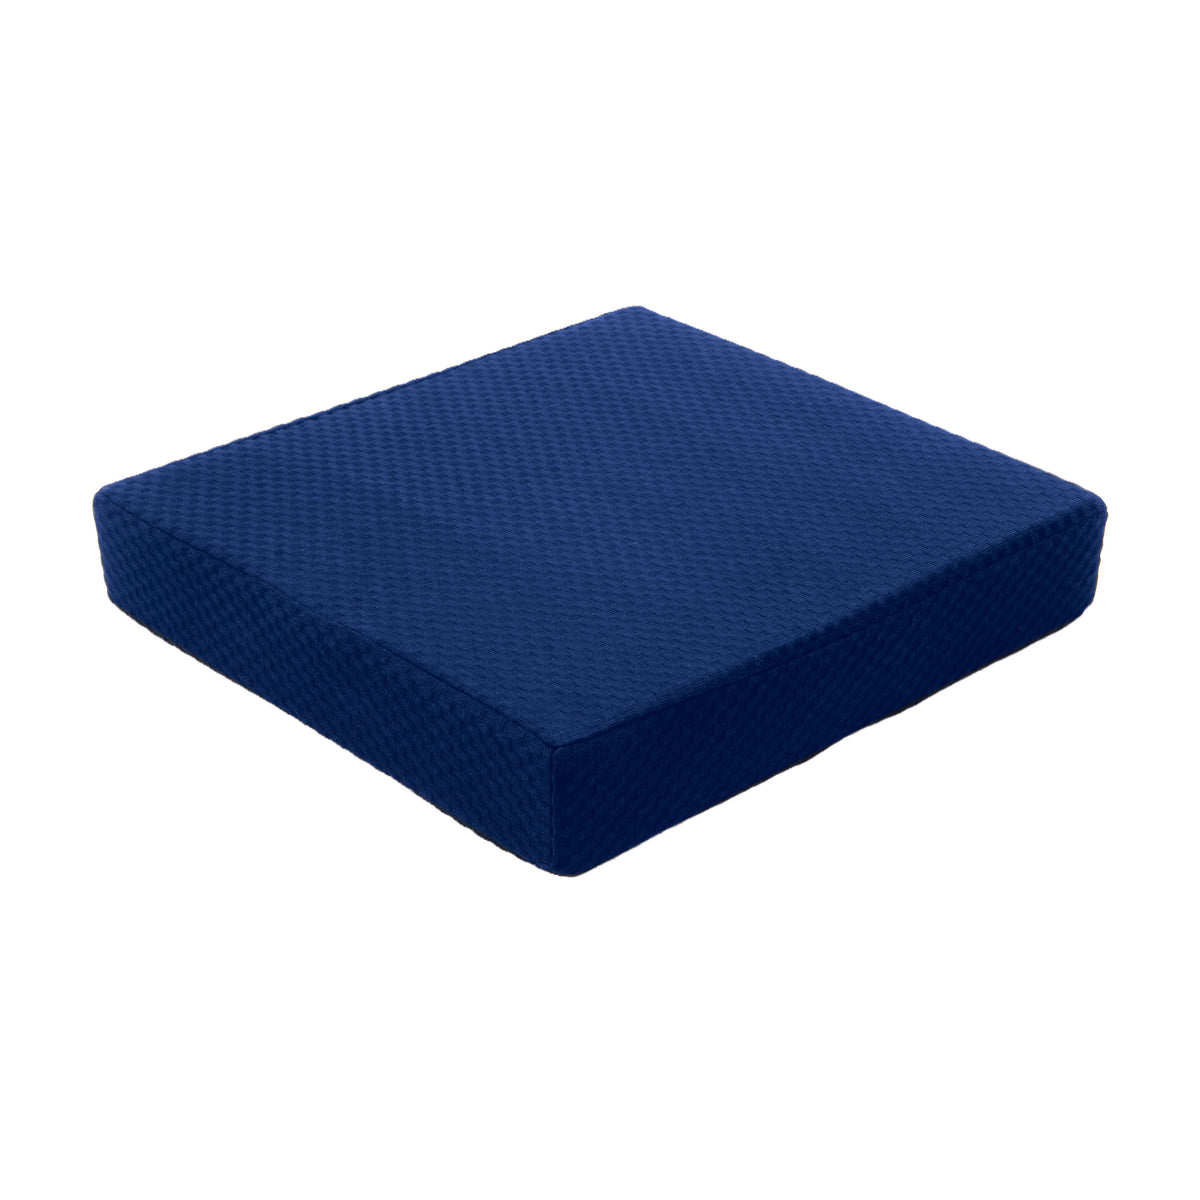 Sloping Coccyx Cushion - Just Walkers